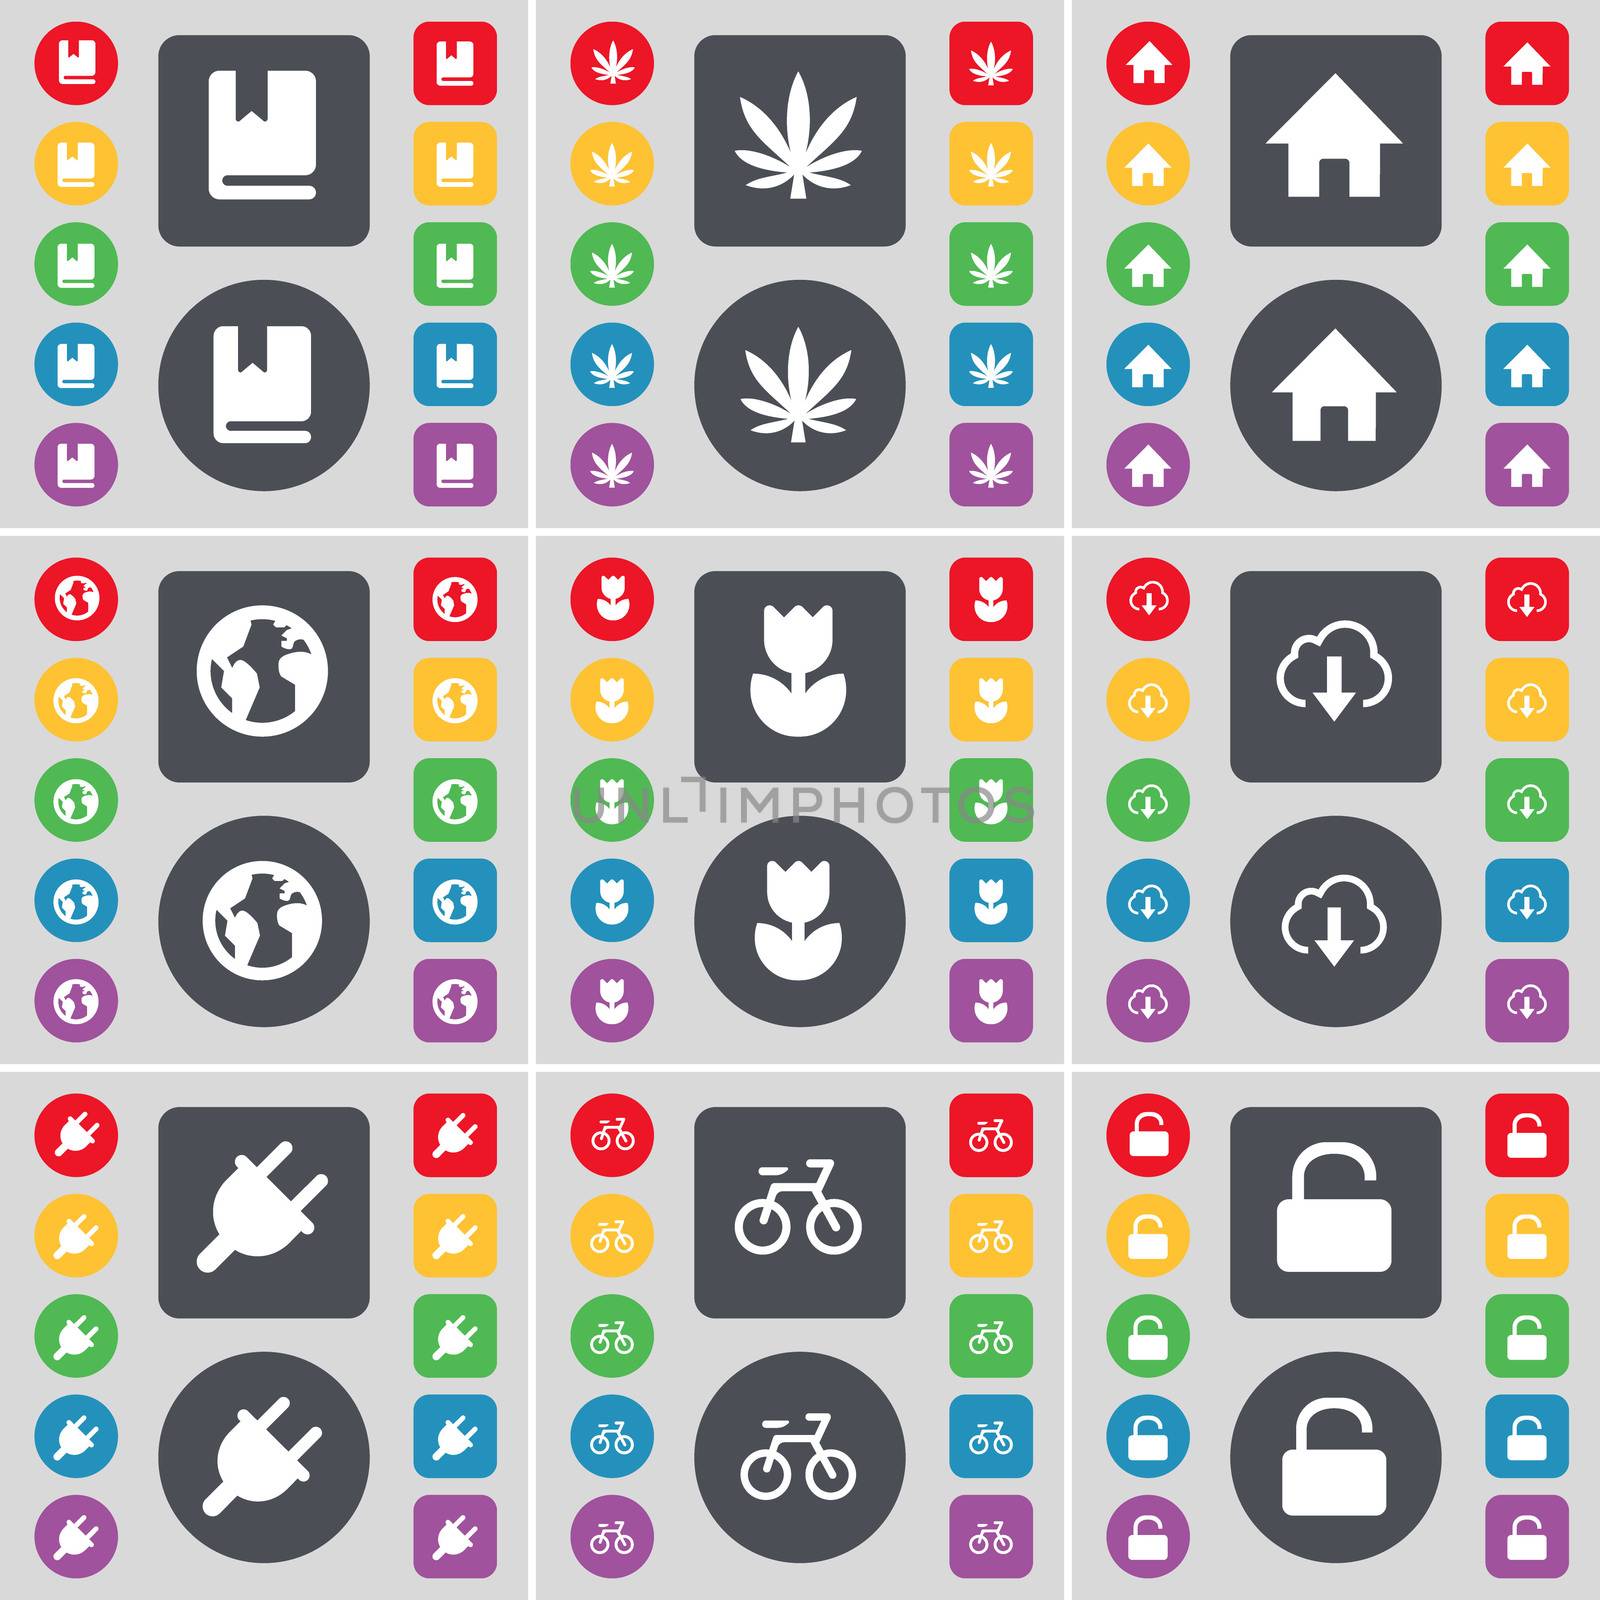 Dictionary, Marijuana, House, Earth, Folder, Cloud, Socket, Bicycle, Lock icon symbol. A large set of flat, colored buttons for your design.  by serhii_lohvyniuk